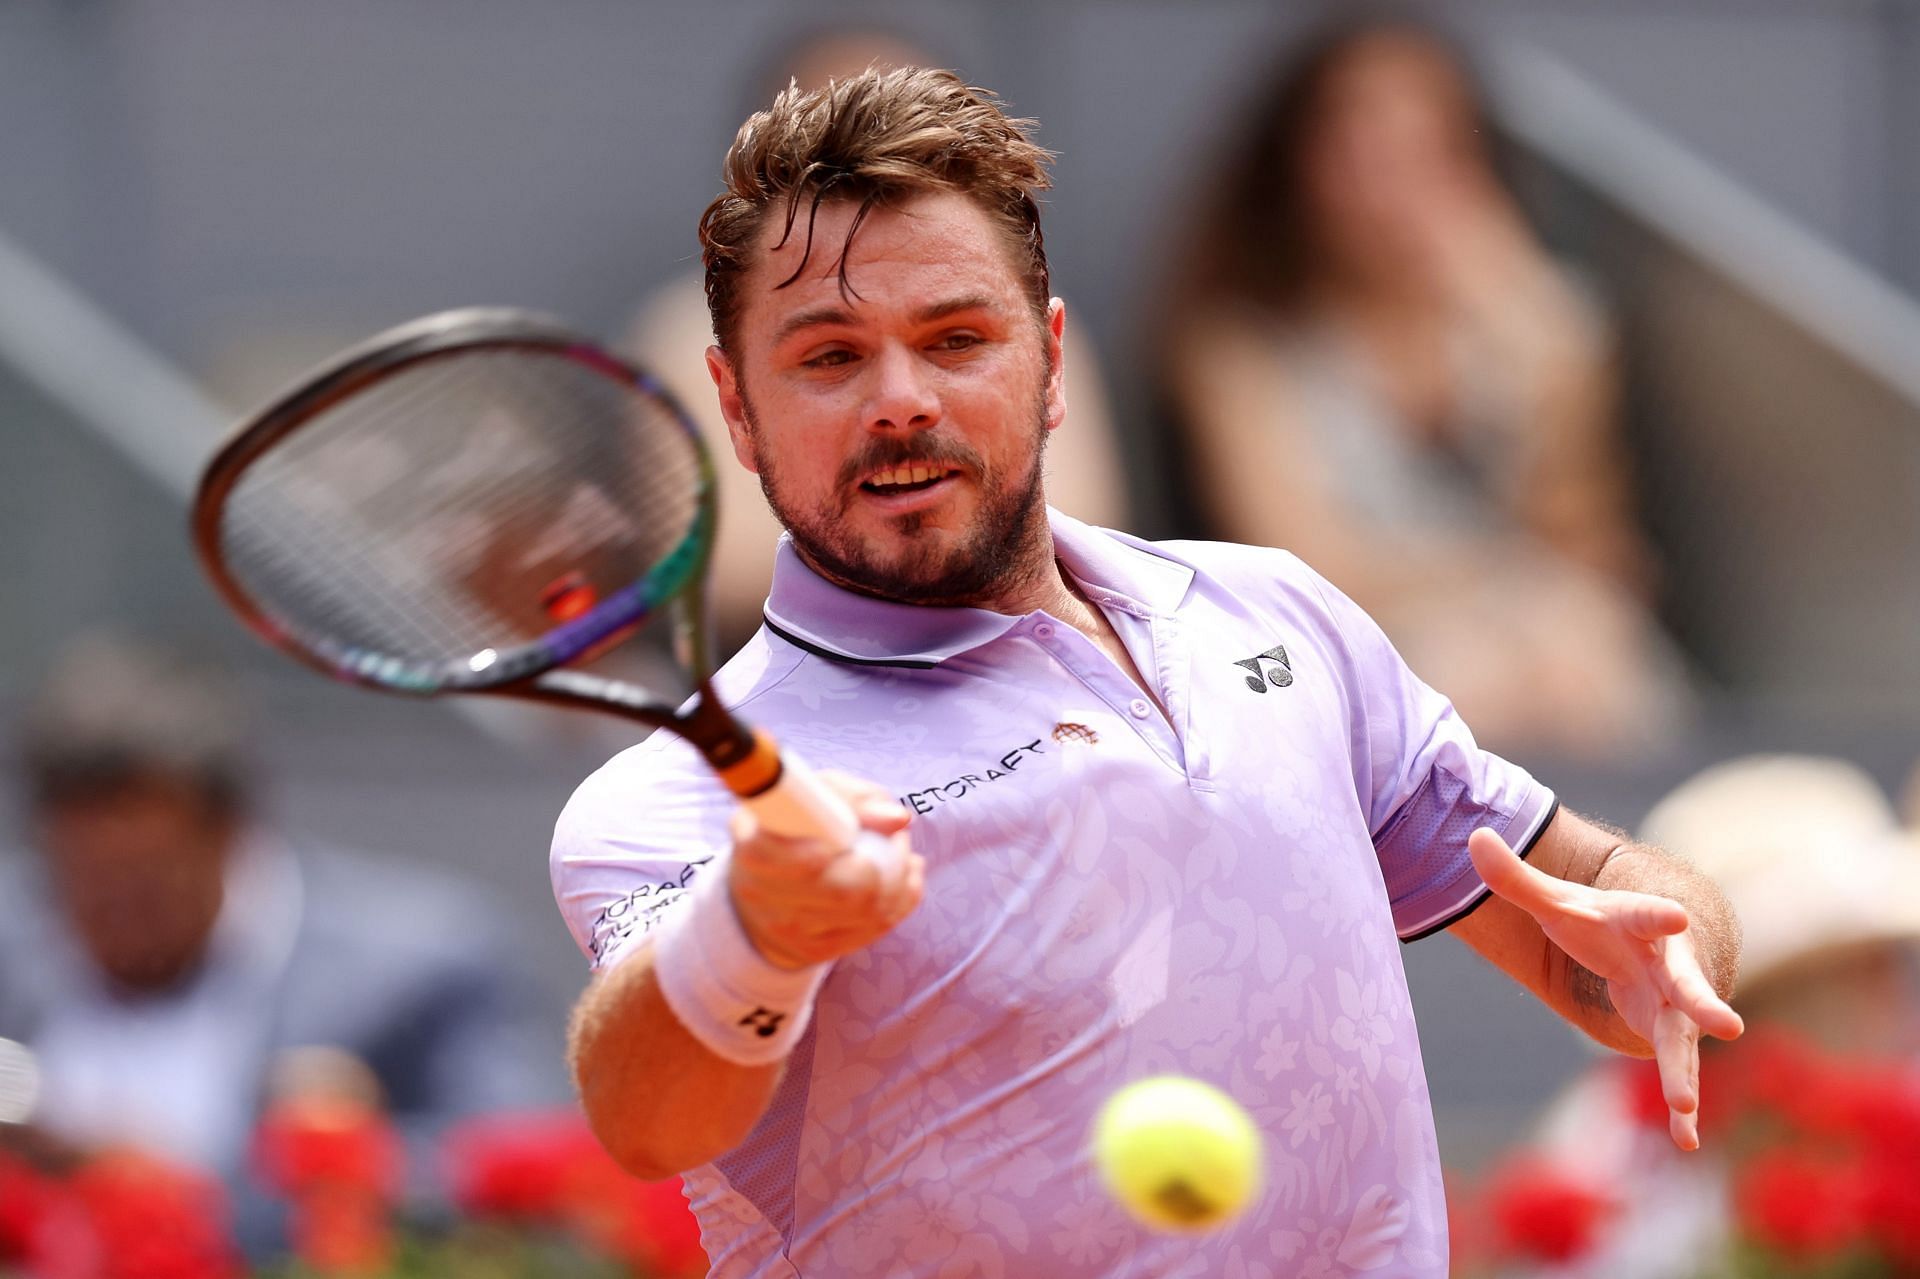 Wawrinka will be in action in Rome on Wednesday.